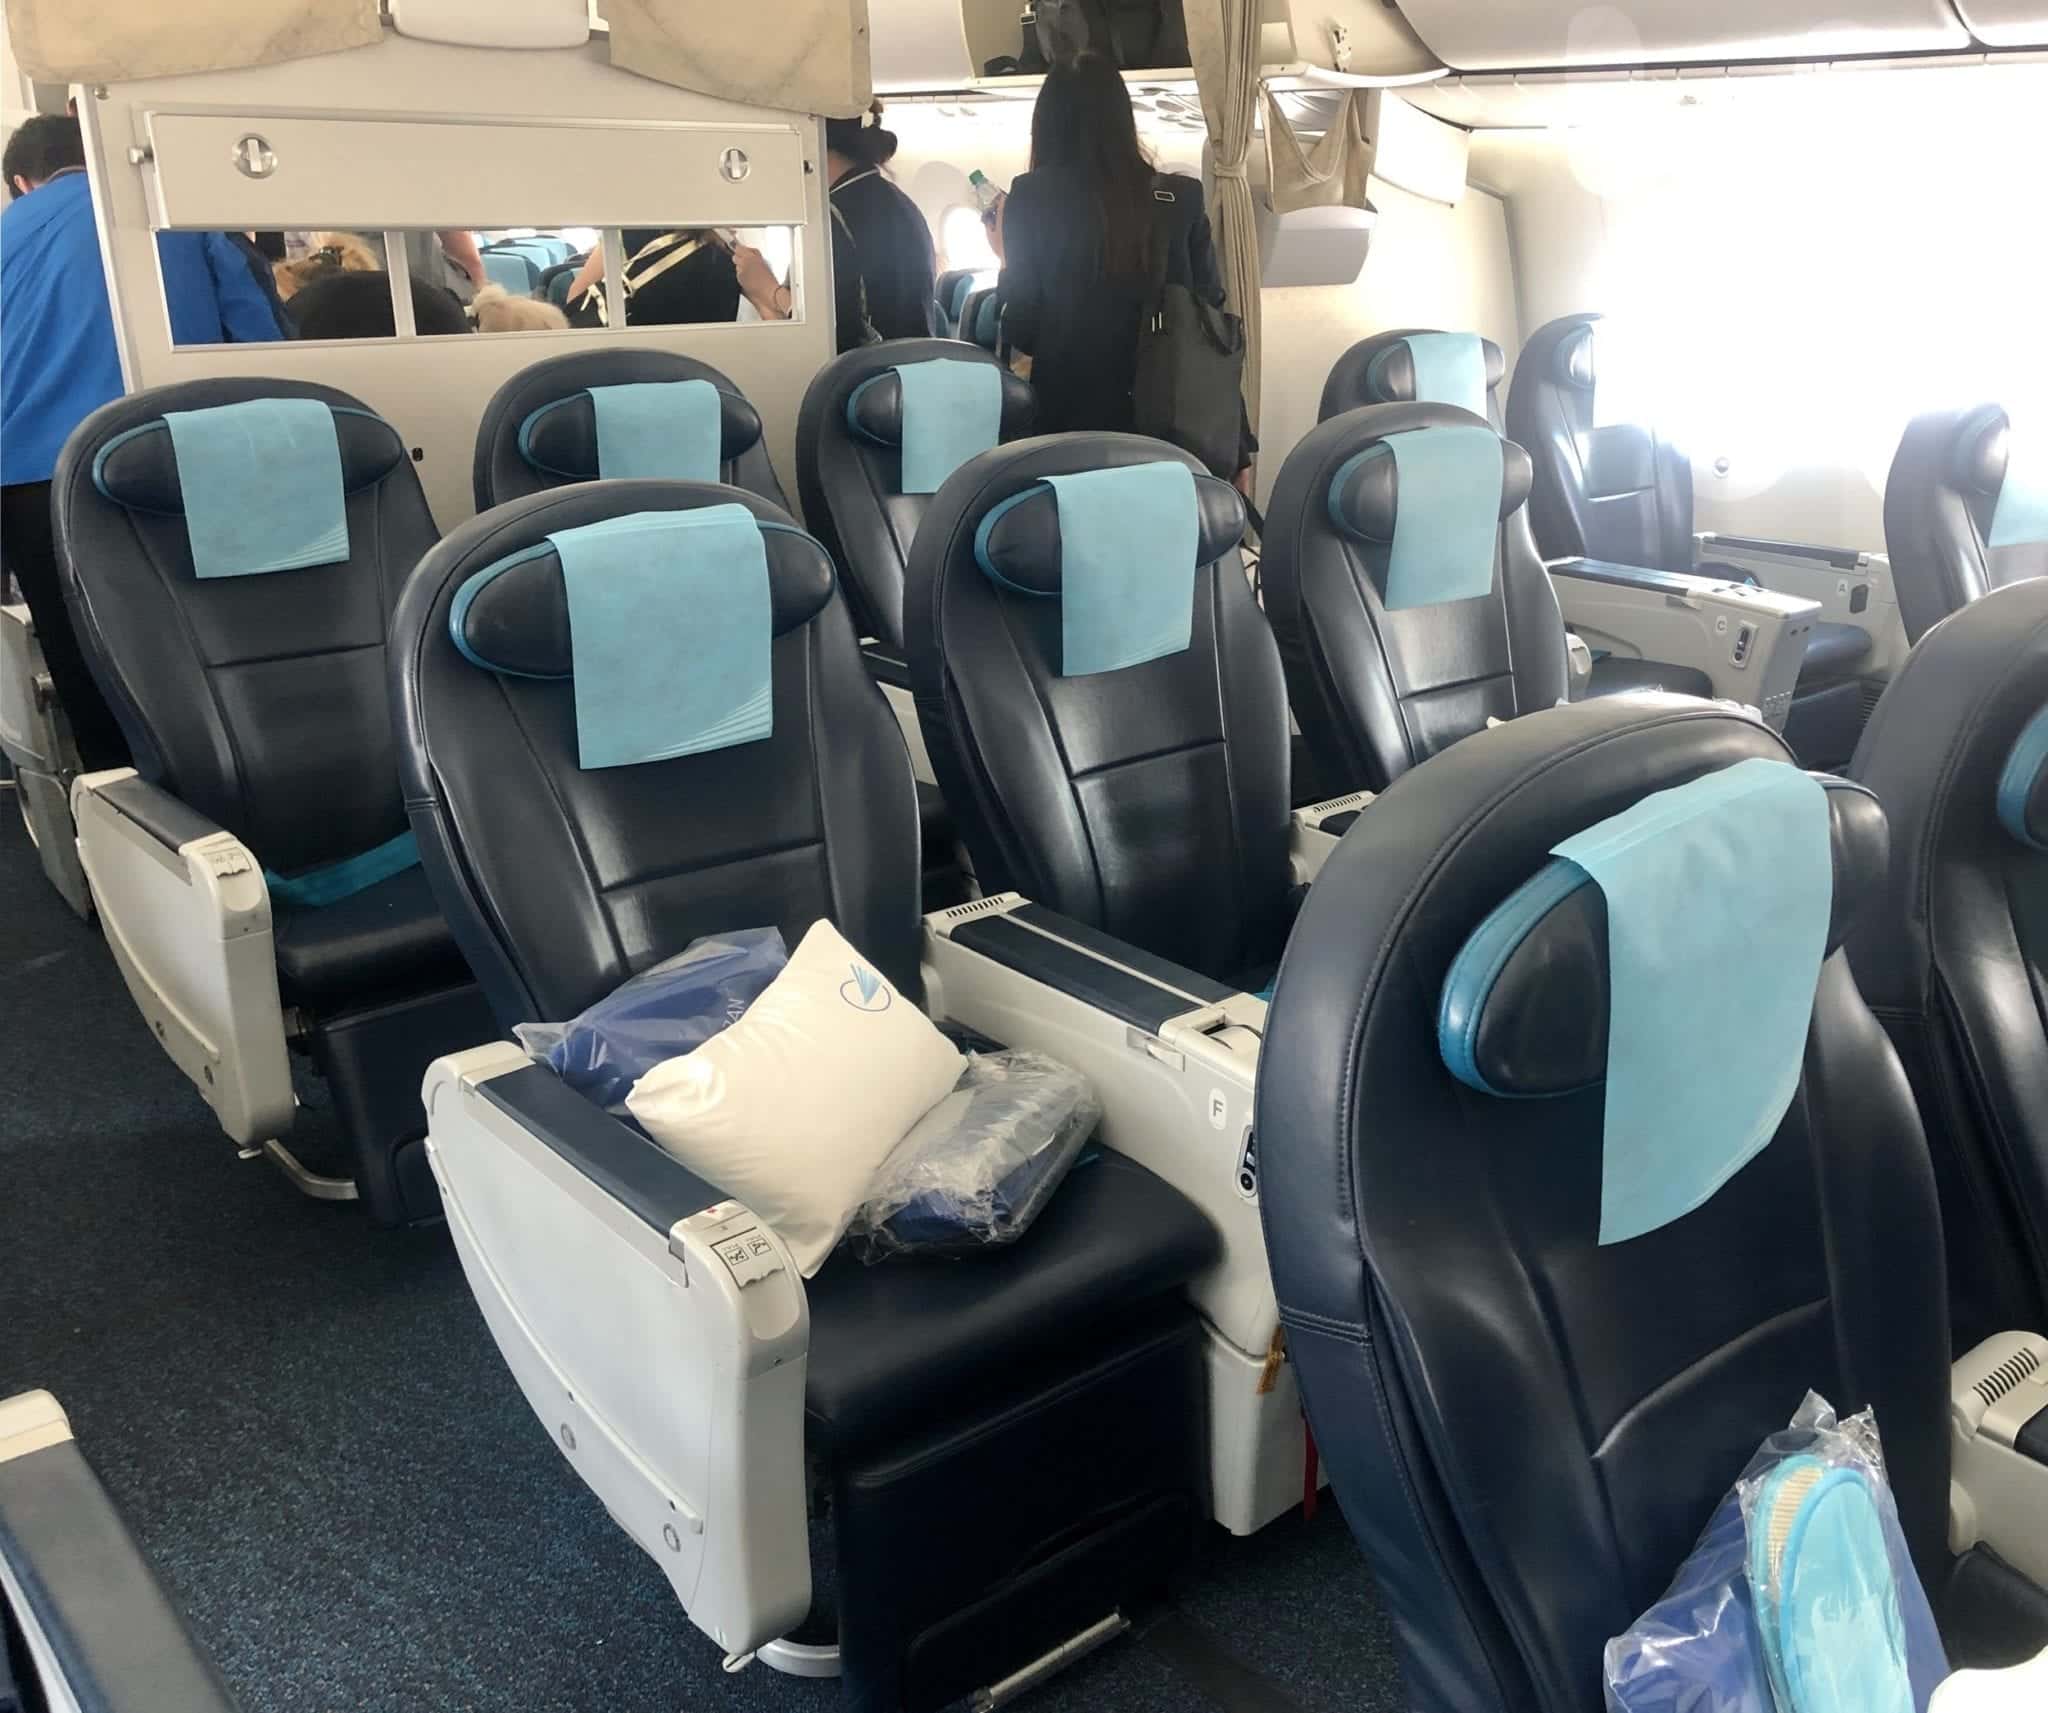 Inside view of an Azerbaijan Airlines flight, Comfort Club. Larger dark blue metal seats separated by thick armrests with pillows and blankets.